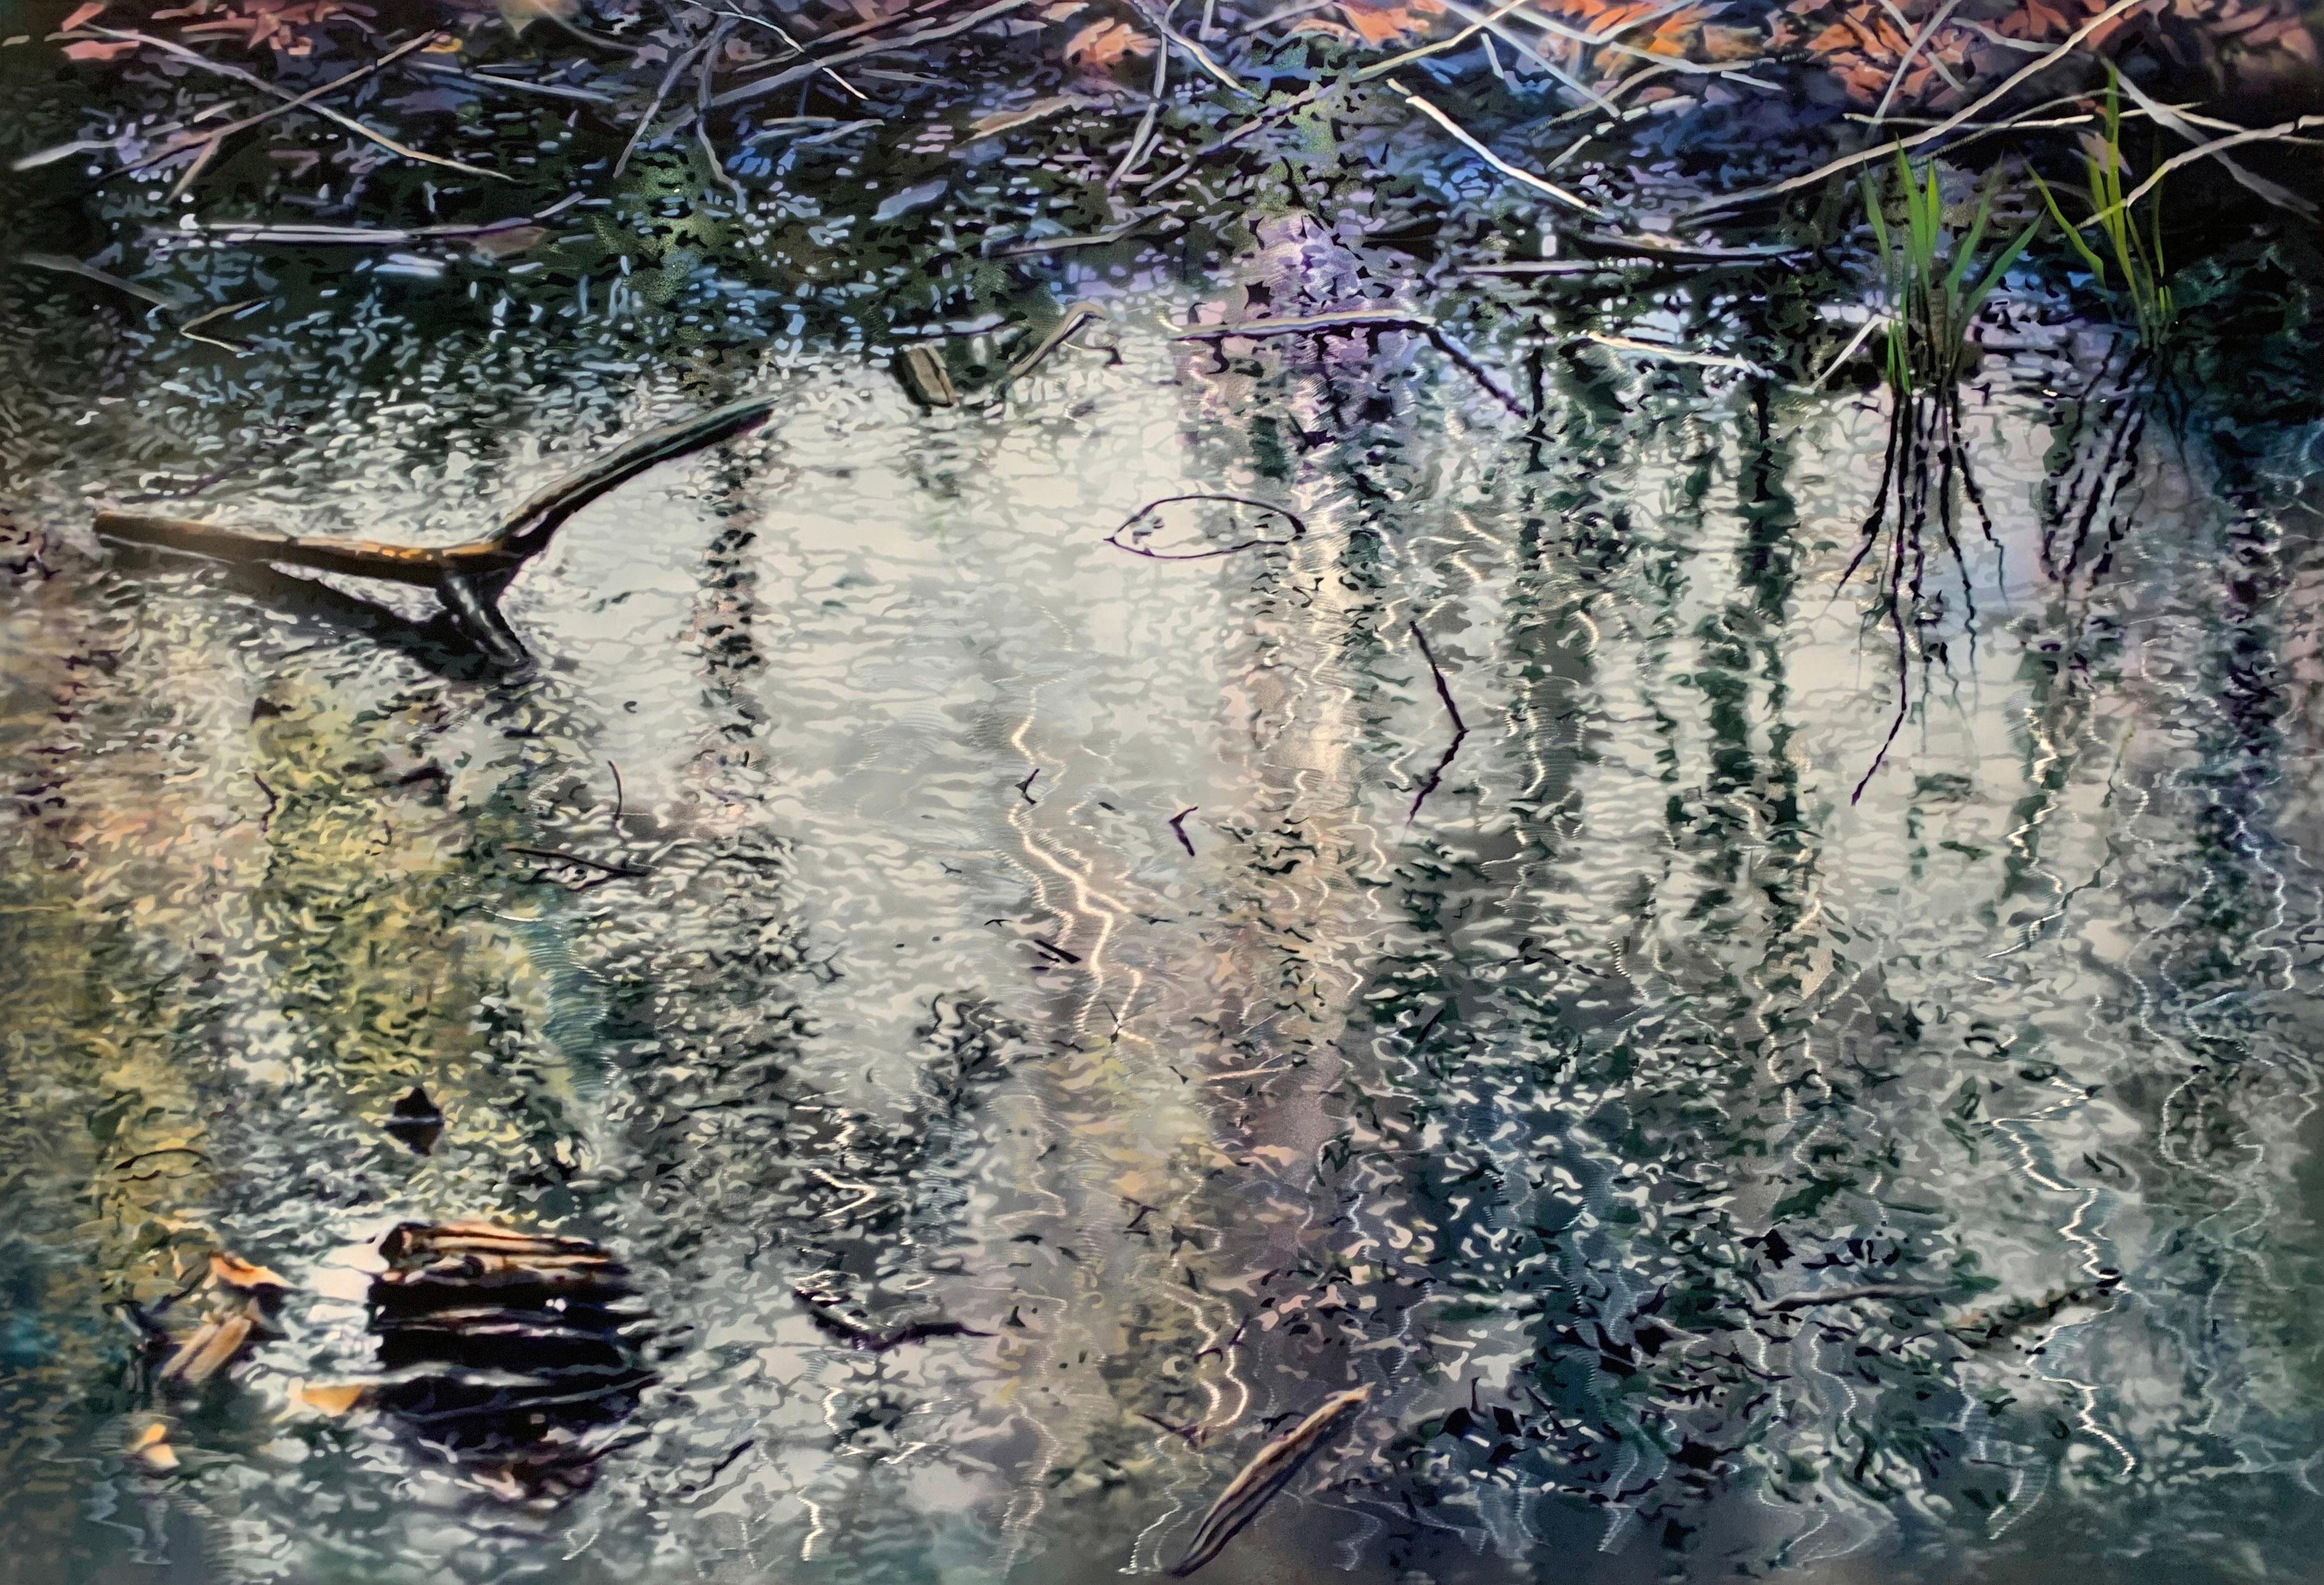 Pond Calligraphy - Painting by David Kessler